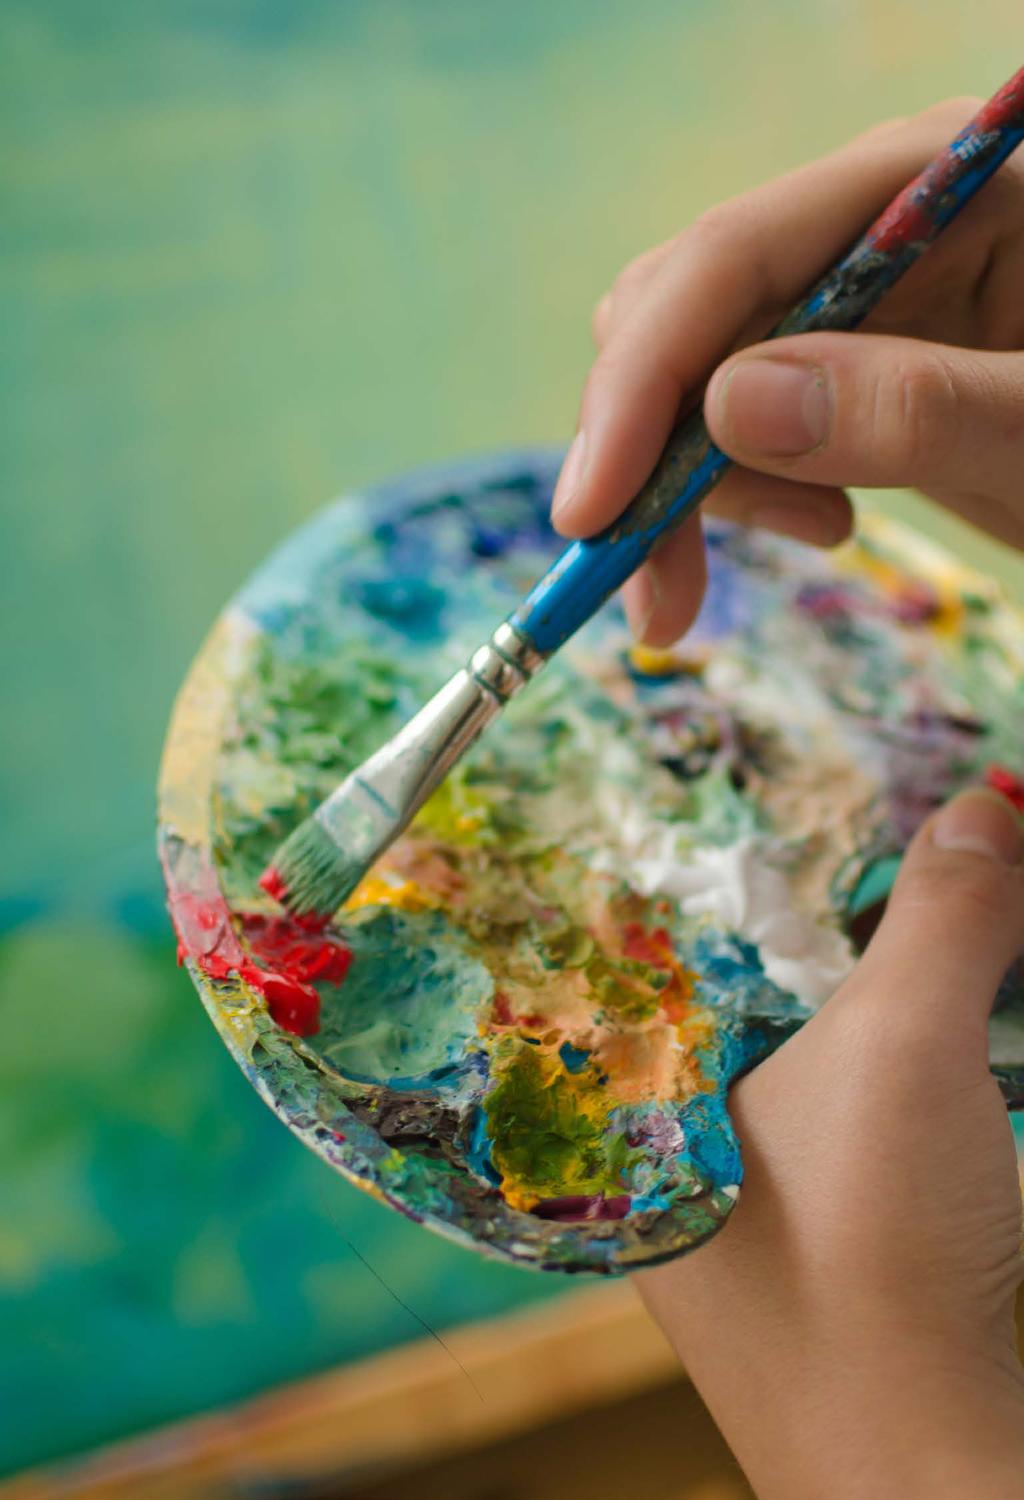 Art therapy helps you express yourself through creative exercises that help you to make sense of difficult emotions and experiences.